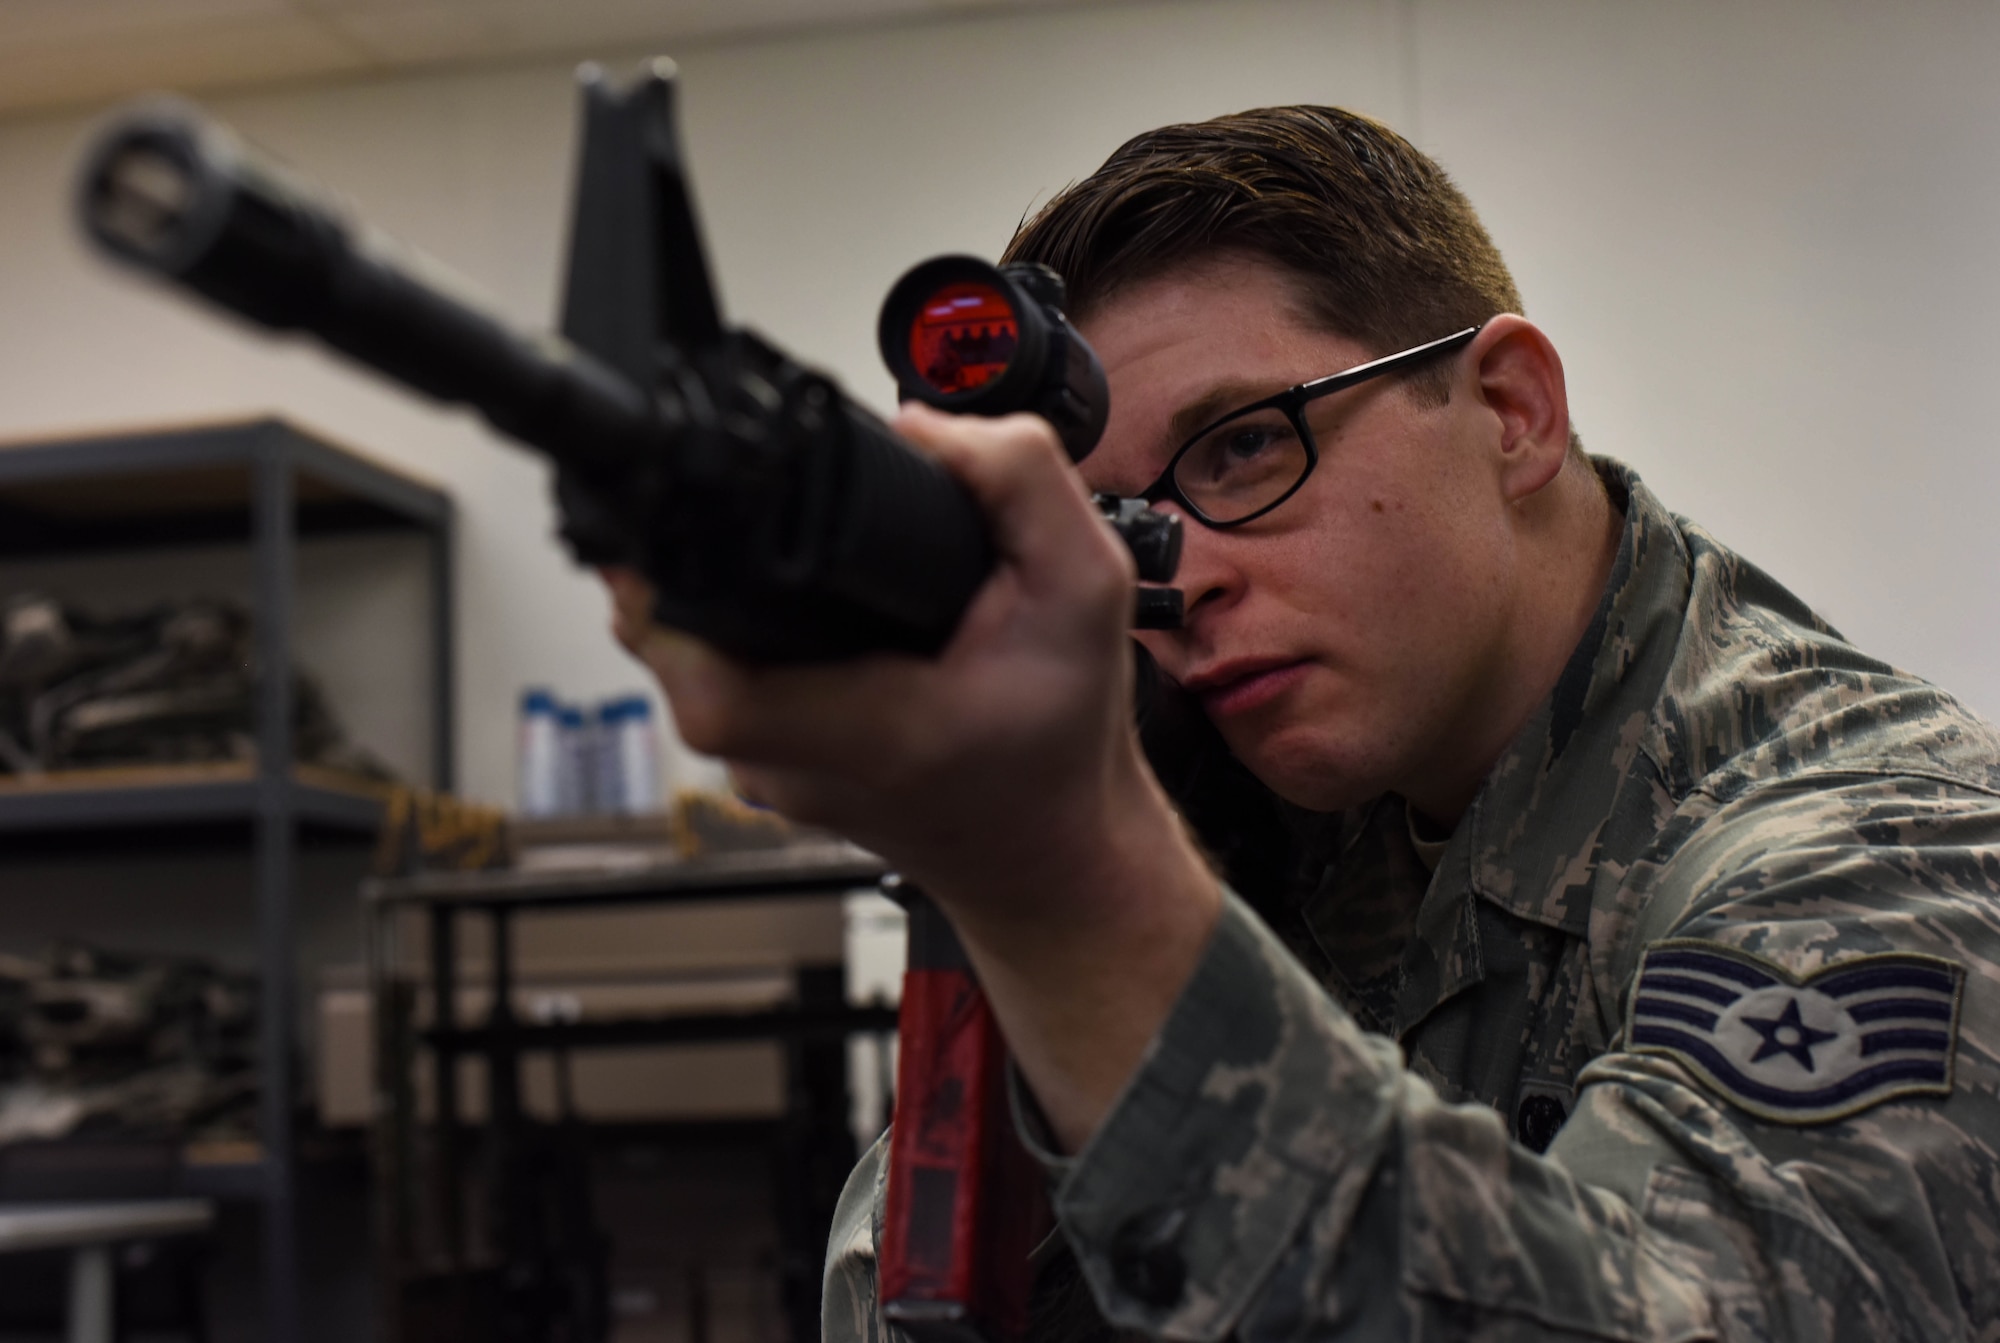 Staff Sgt. John A. Lucic, 62nd Maintenance Squadron unit training manager, looks through the scope of an M-4 carbine during the 627th Security Forces Squadron’s Combat Arms Training and Maintenance class at Joint Base Lewis-McChord, Wash., Jan. 31, 2018.